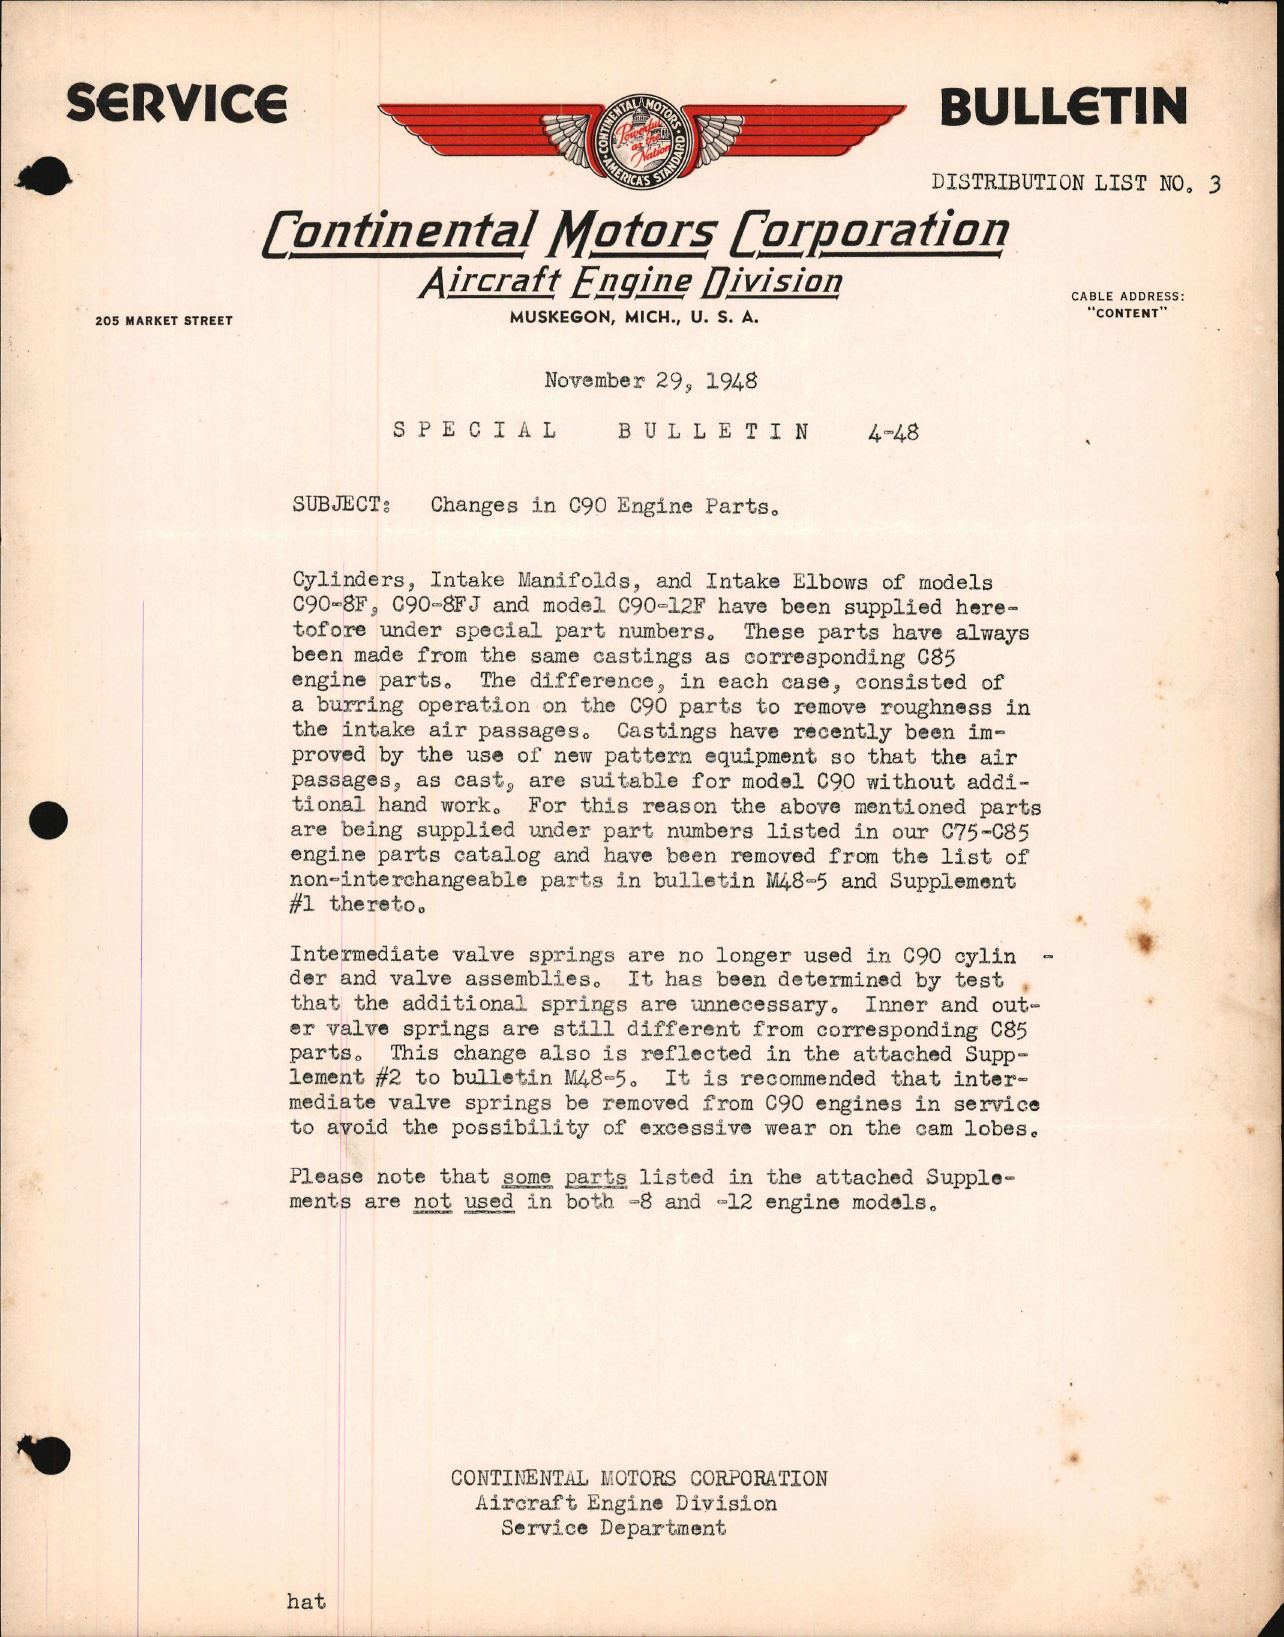 Sample page 1 from AirCorps Library document: Changes in C90 Engine Parts